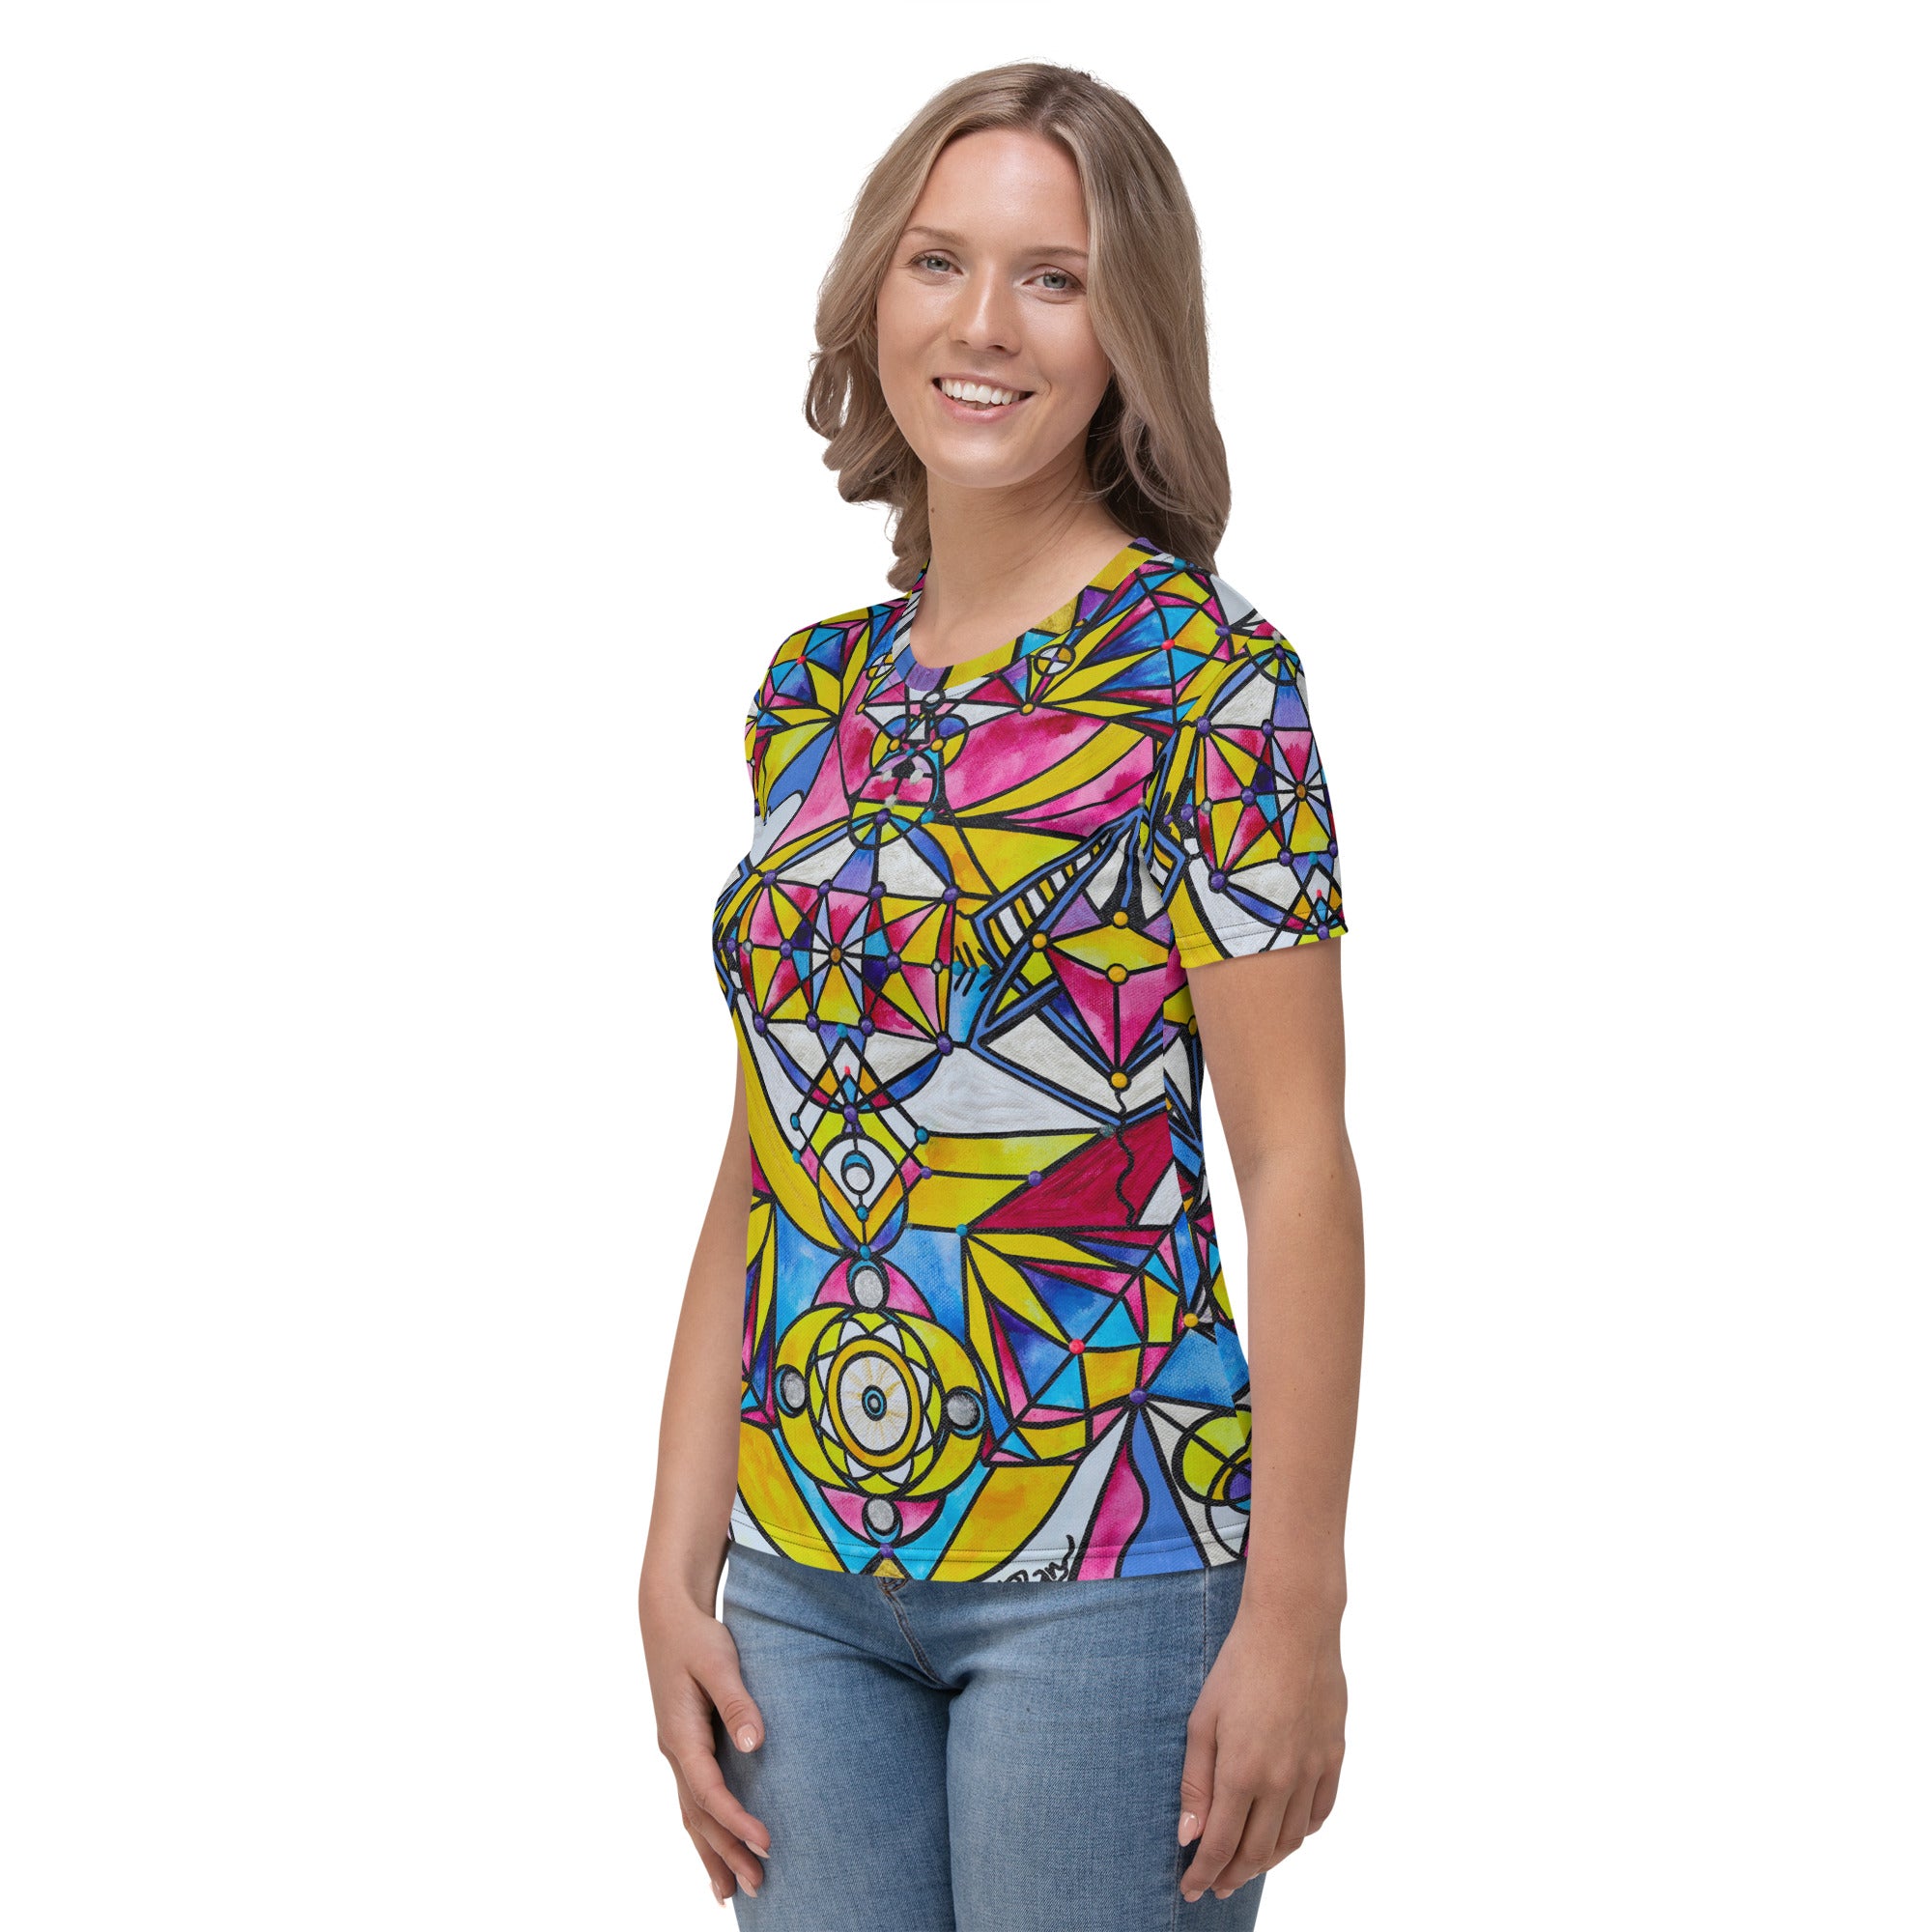 the-newest-page-on-the-internet-to-buy-sanat-kumara-consciousness-womens-t-shirt-hot-on-sale_2.jpg